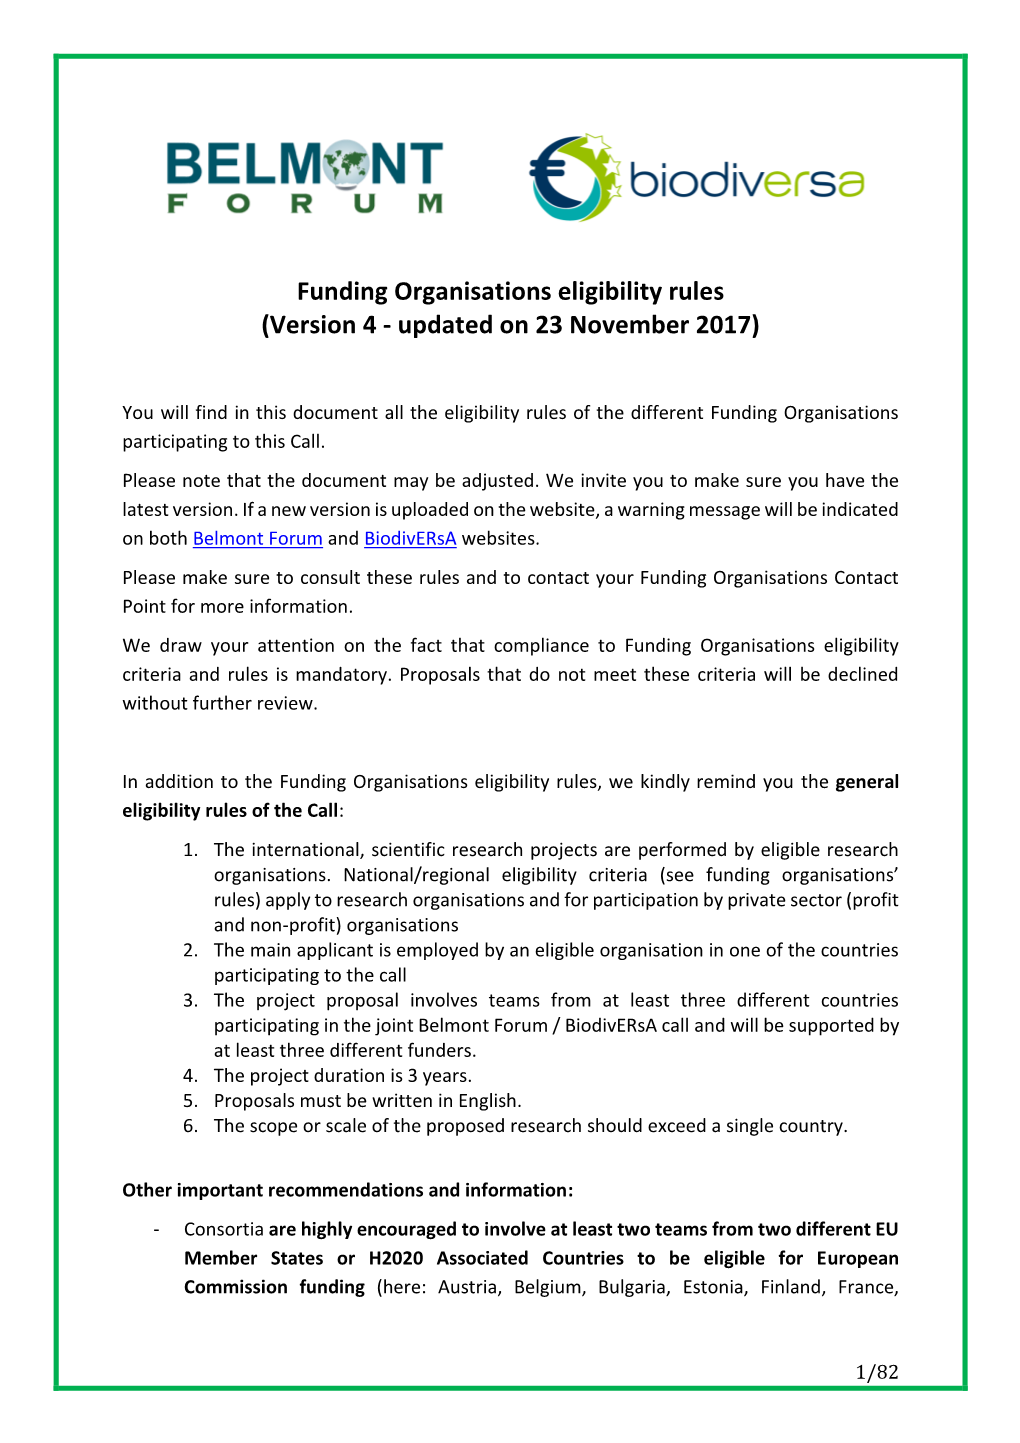 Funding Organisations Eligibility Rules (Version 4 - Updated on 23 November 2017)